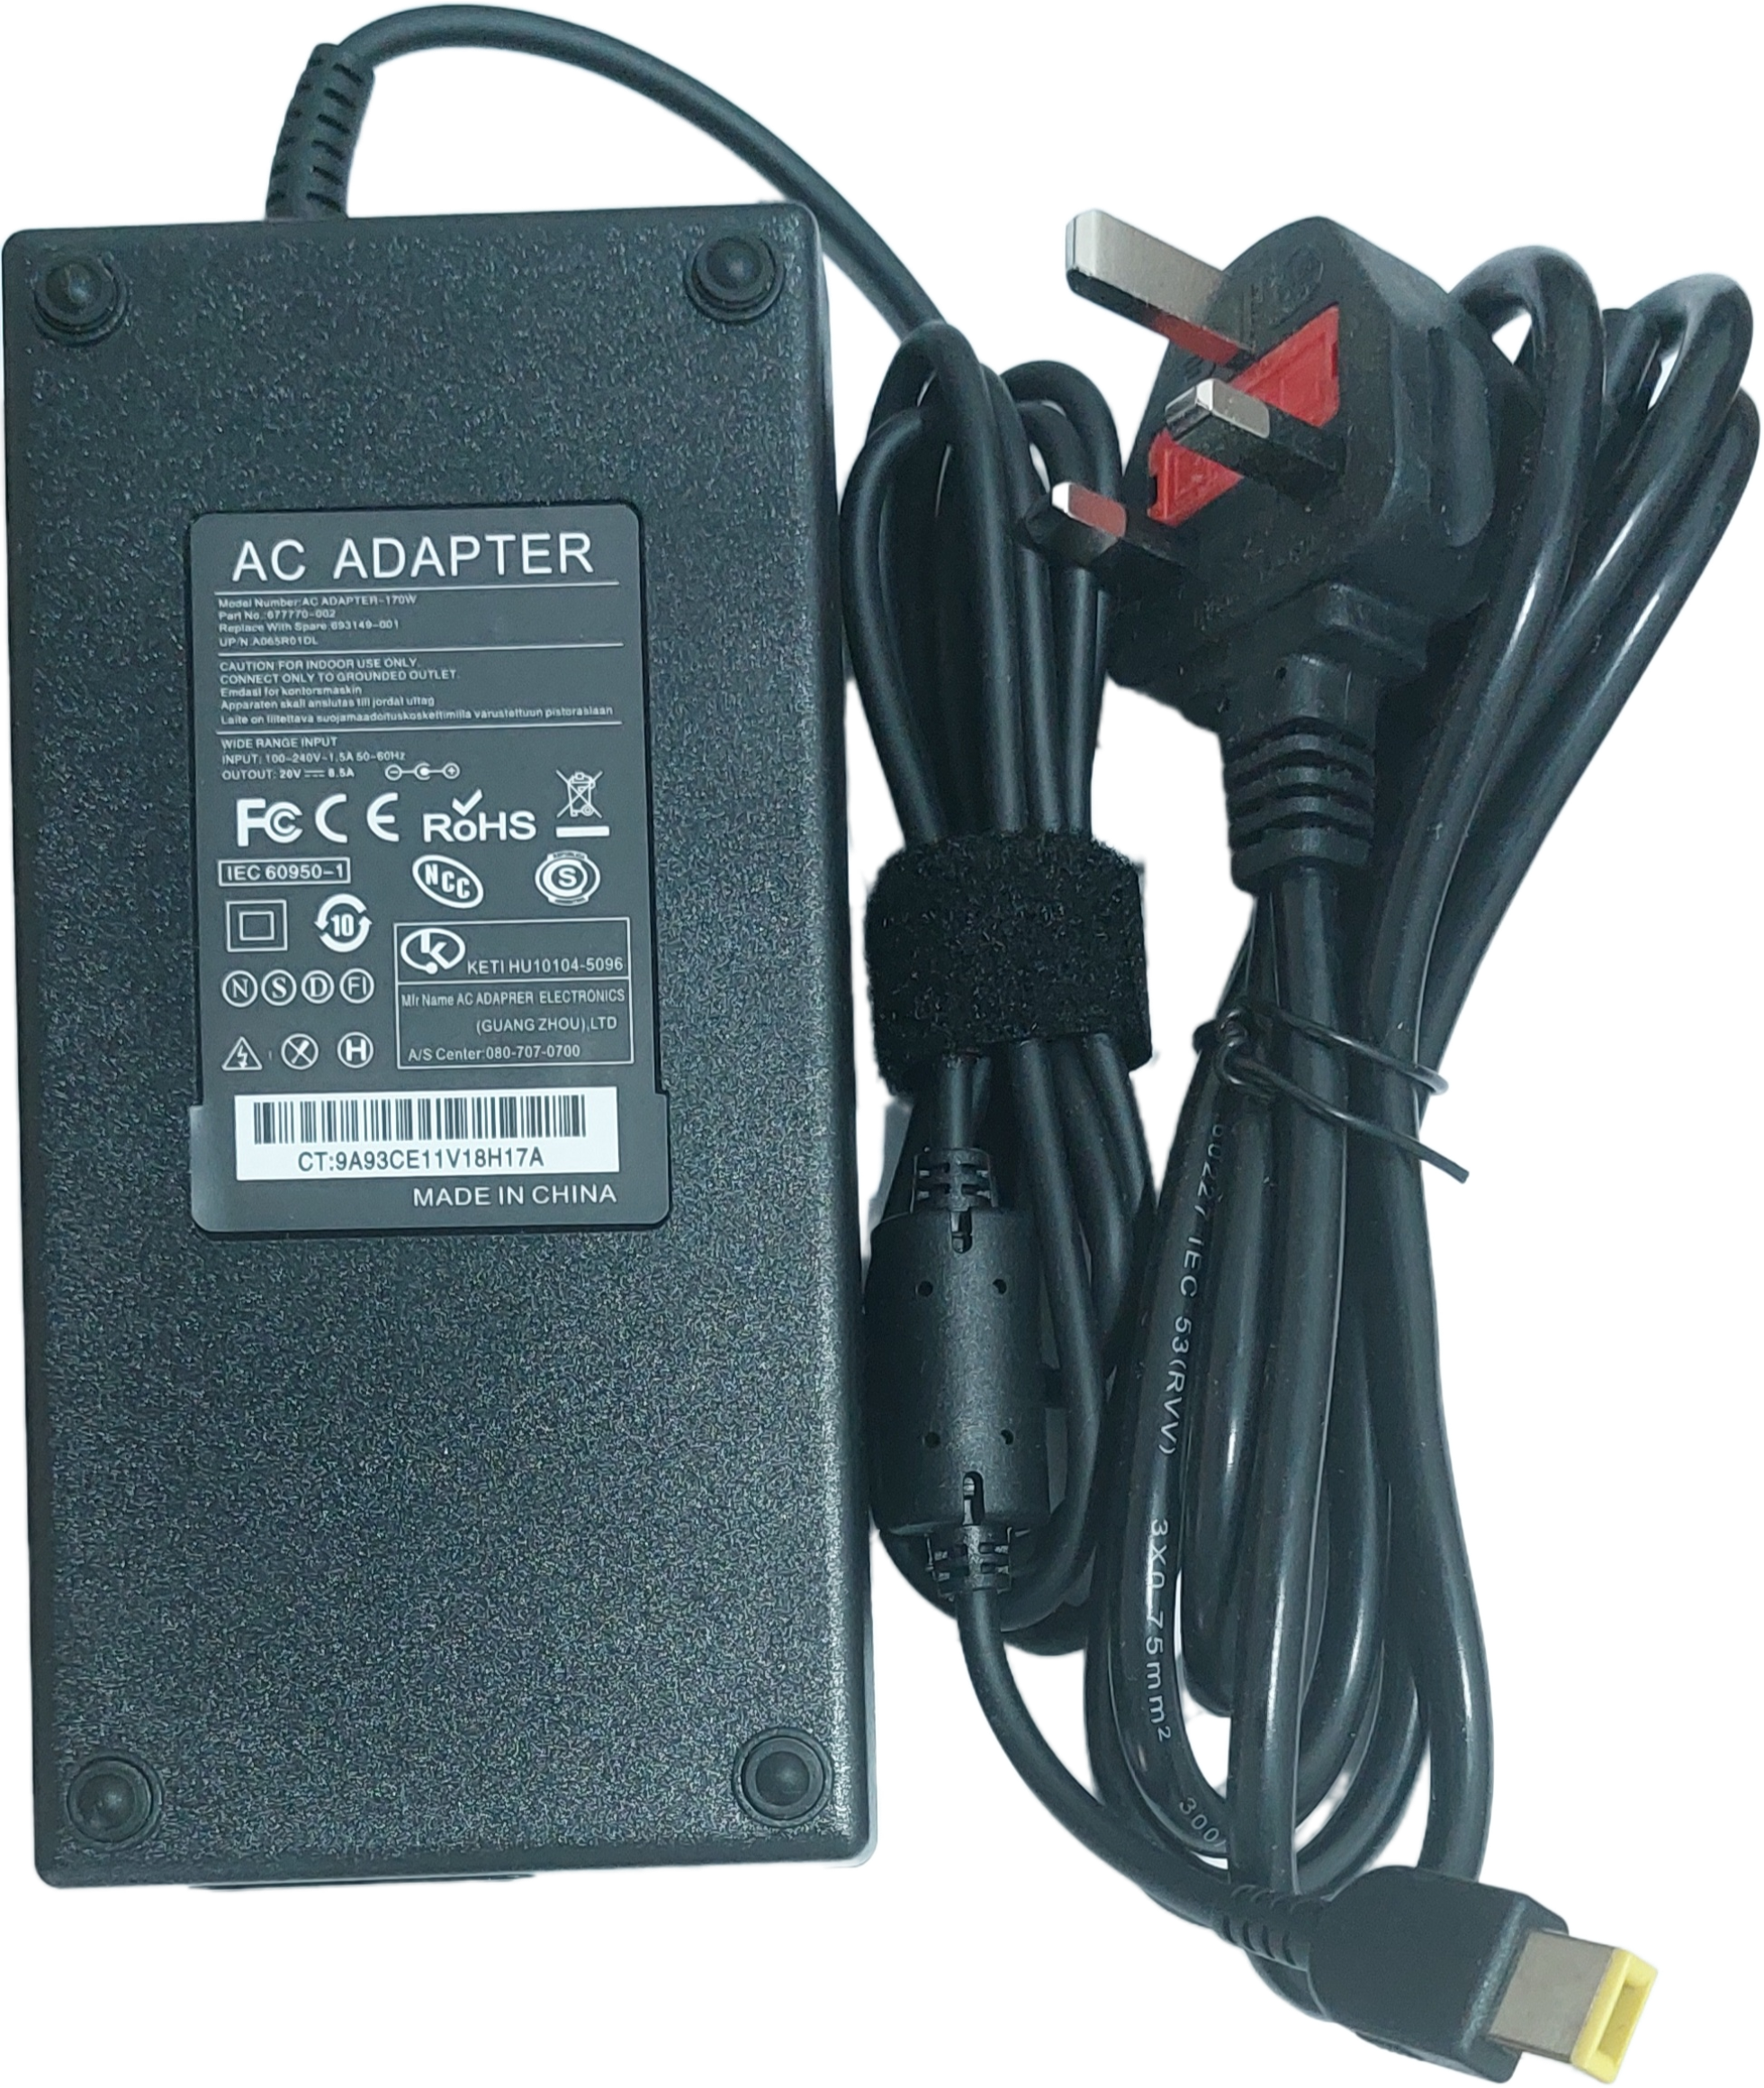 Charger for Lenovo ThinkPad W540 Mobile Workstation